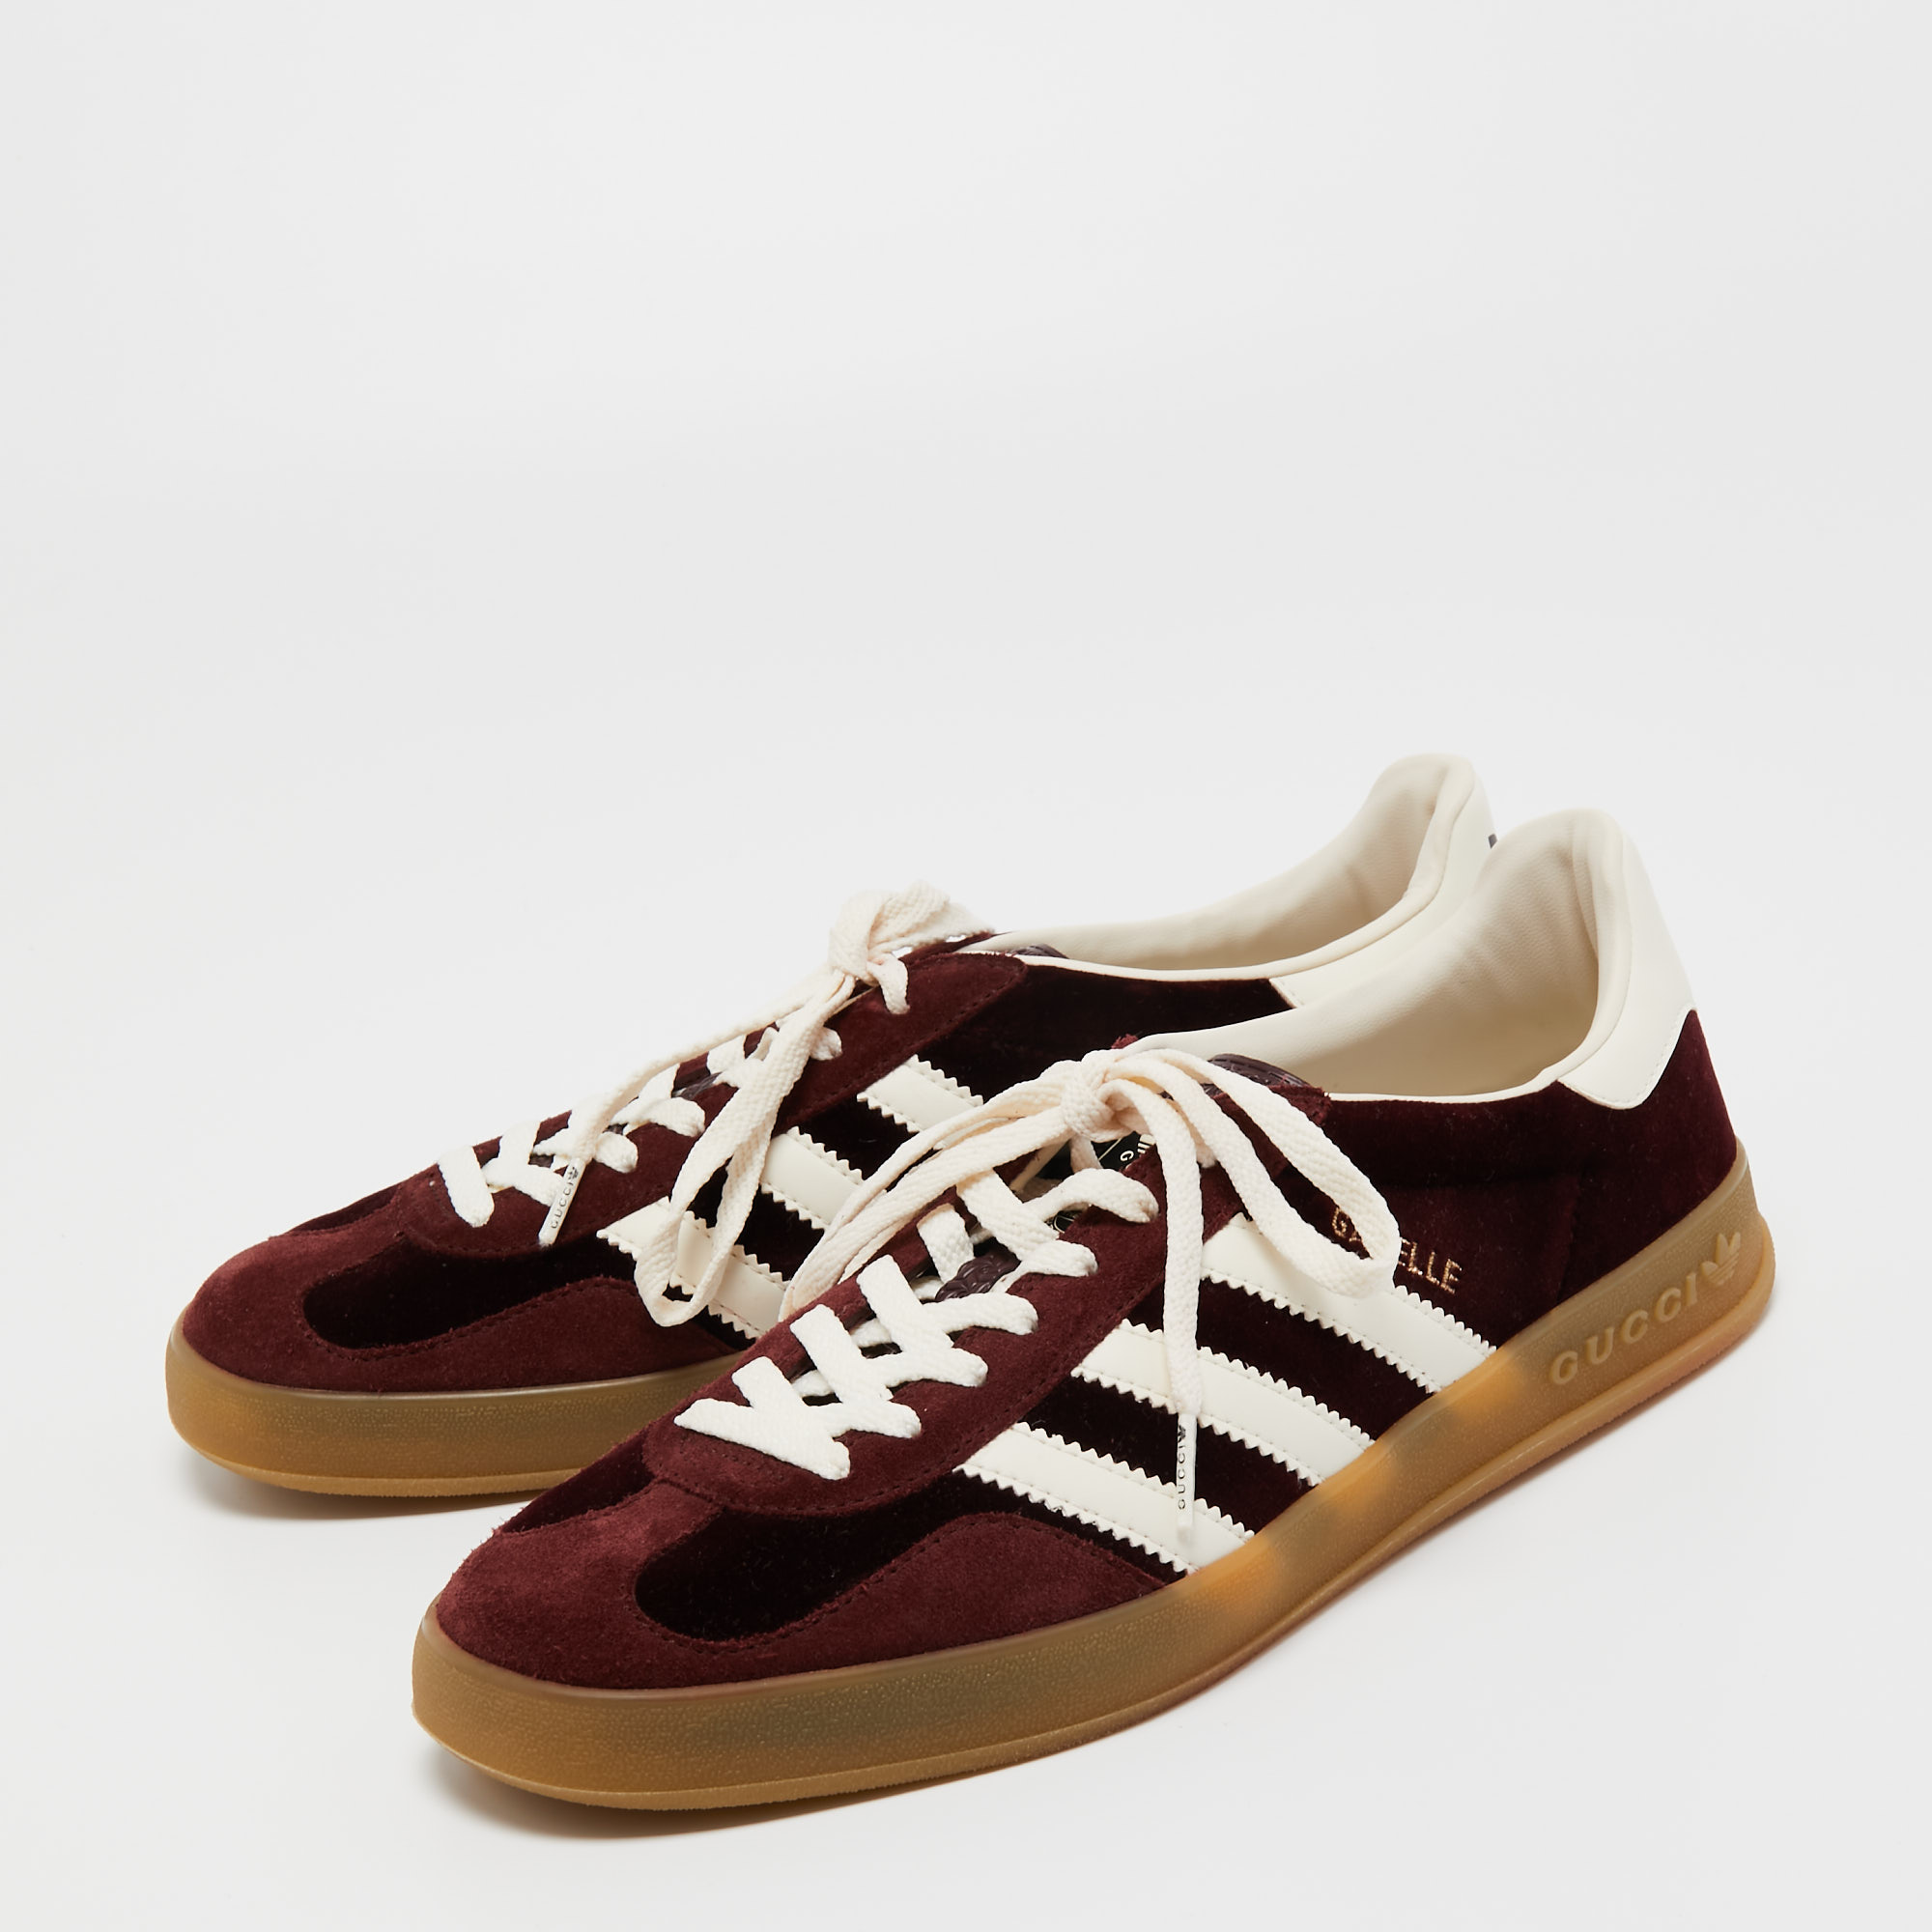 

Adidas x Gucci Burgundy Velvet And Suede Gazelle Sneakers Size